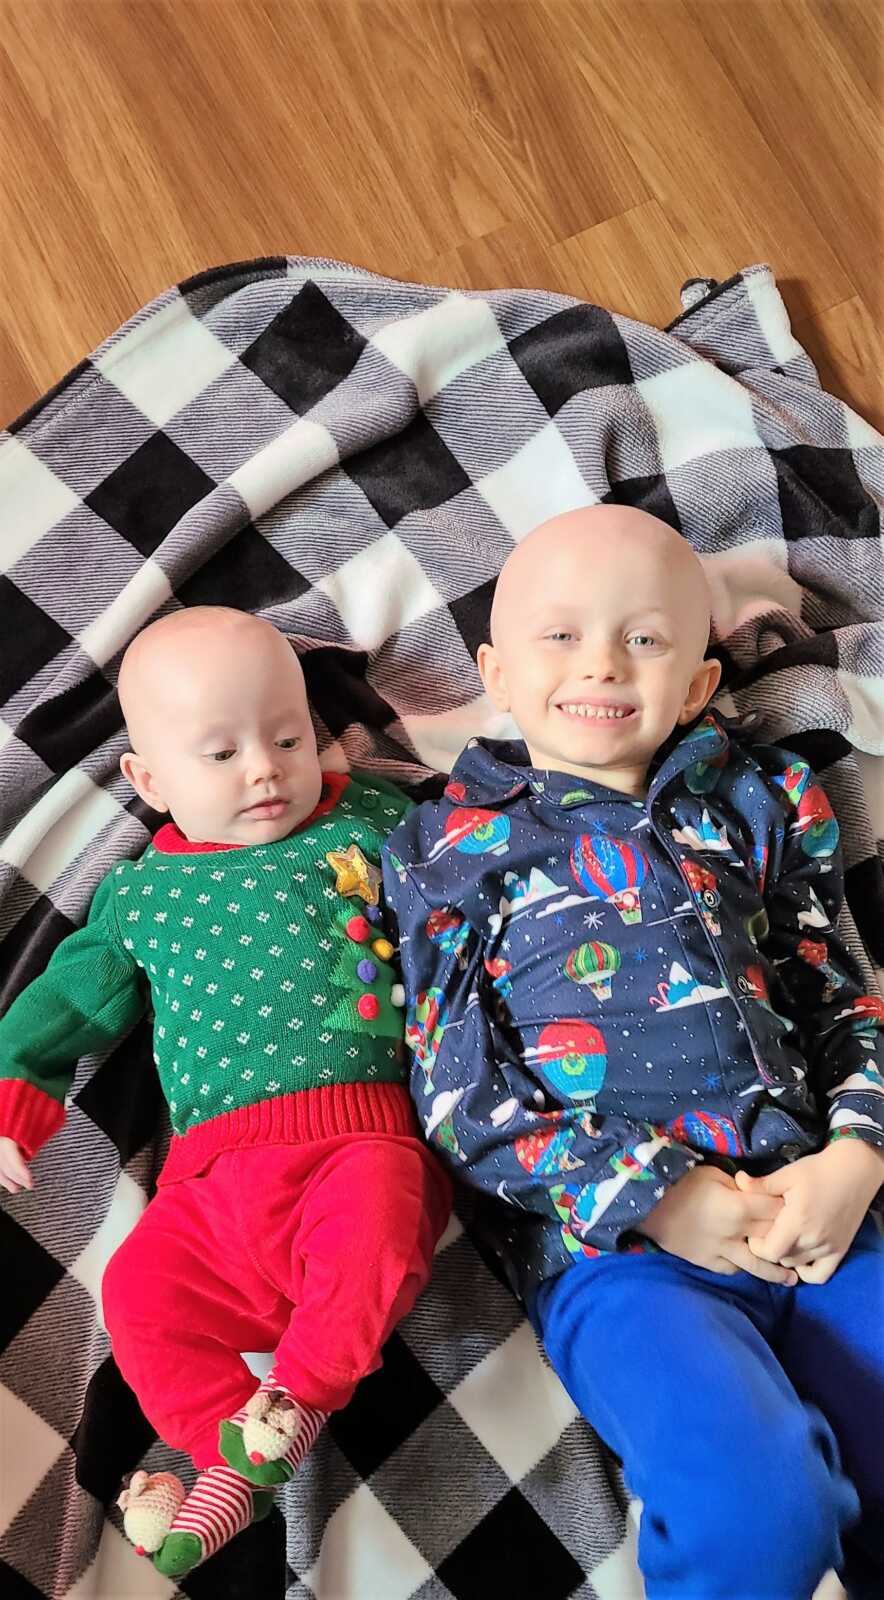 5-year-old cancer survivor laying on the floor on top of a blanket with his baby brother wearing Christmas and Hot air balloon outfits 